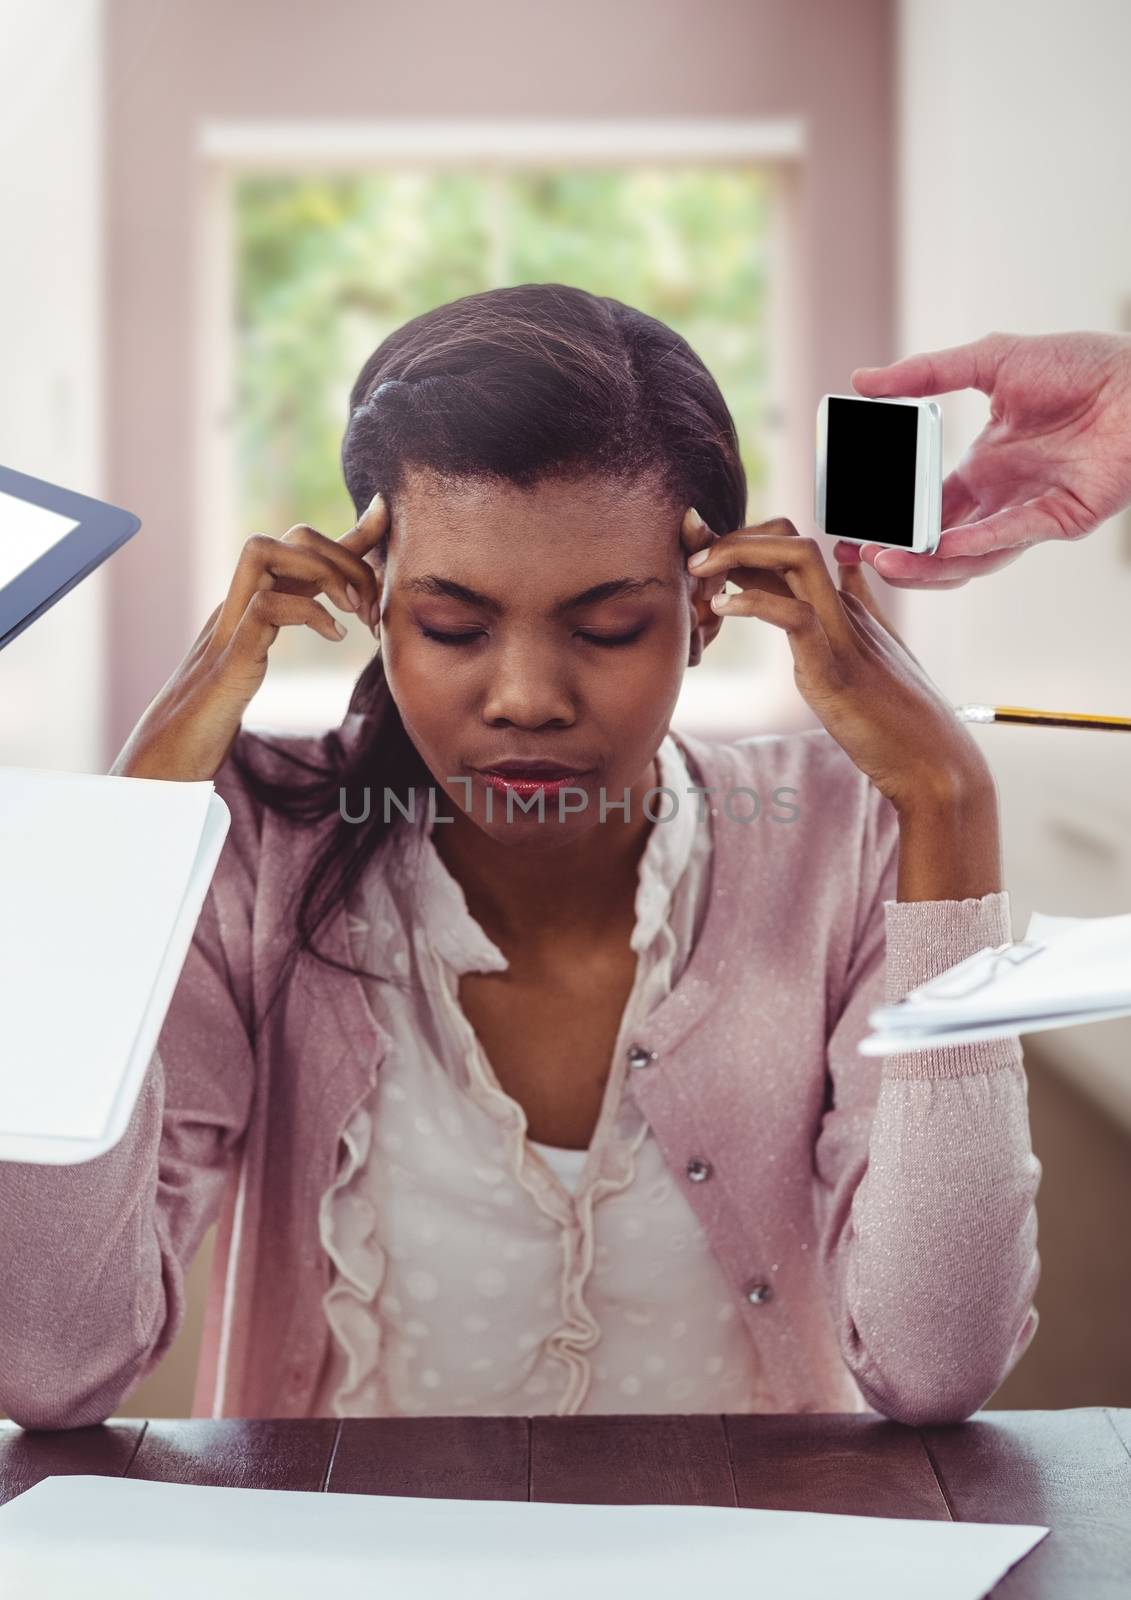 Digital composite of Stressed woman at desk surrounded by nuisances of technology and paperwork